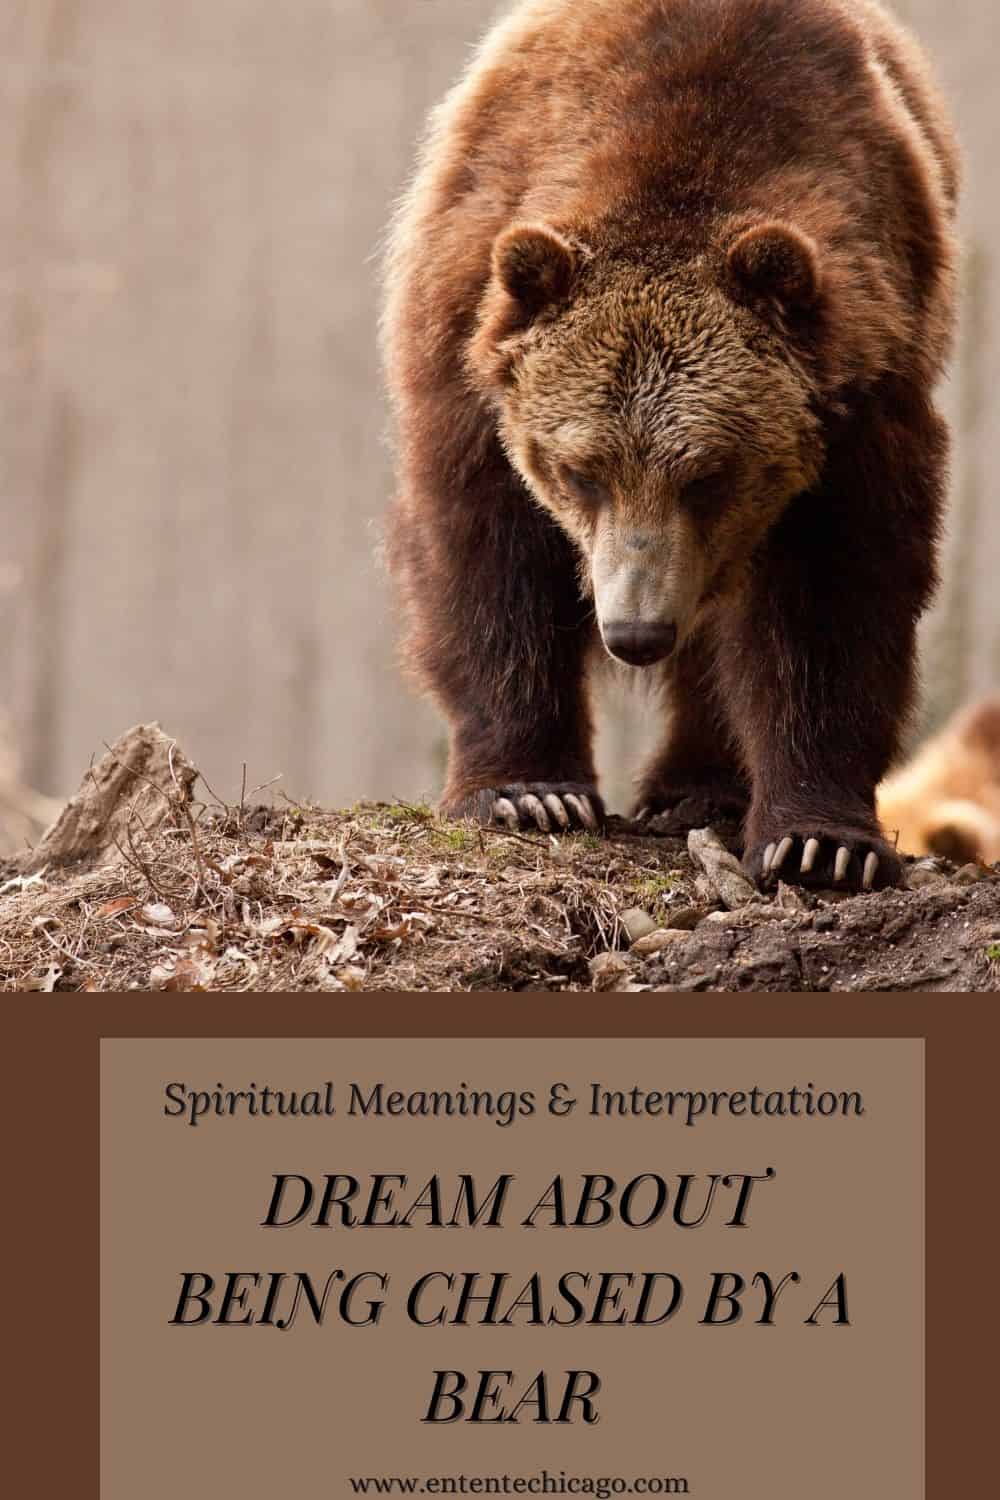 What does it mean when you dream about being chased by a bear?